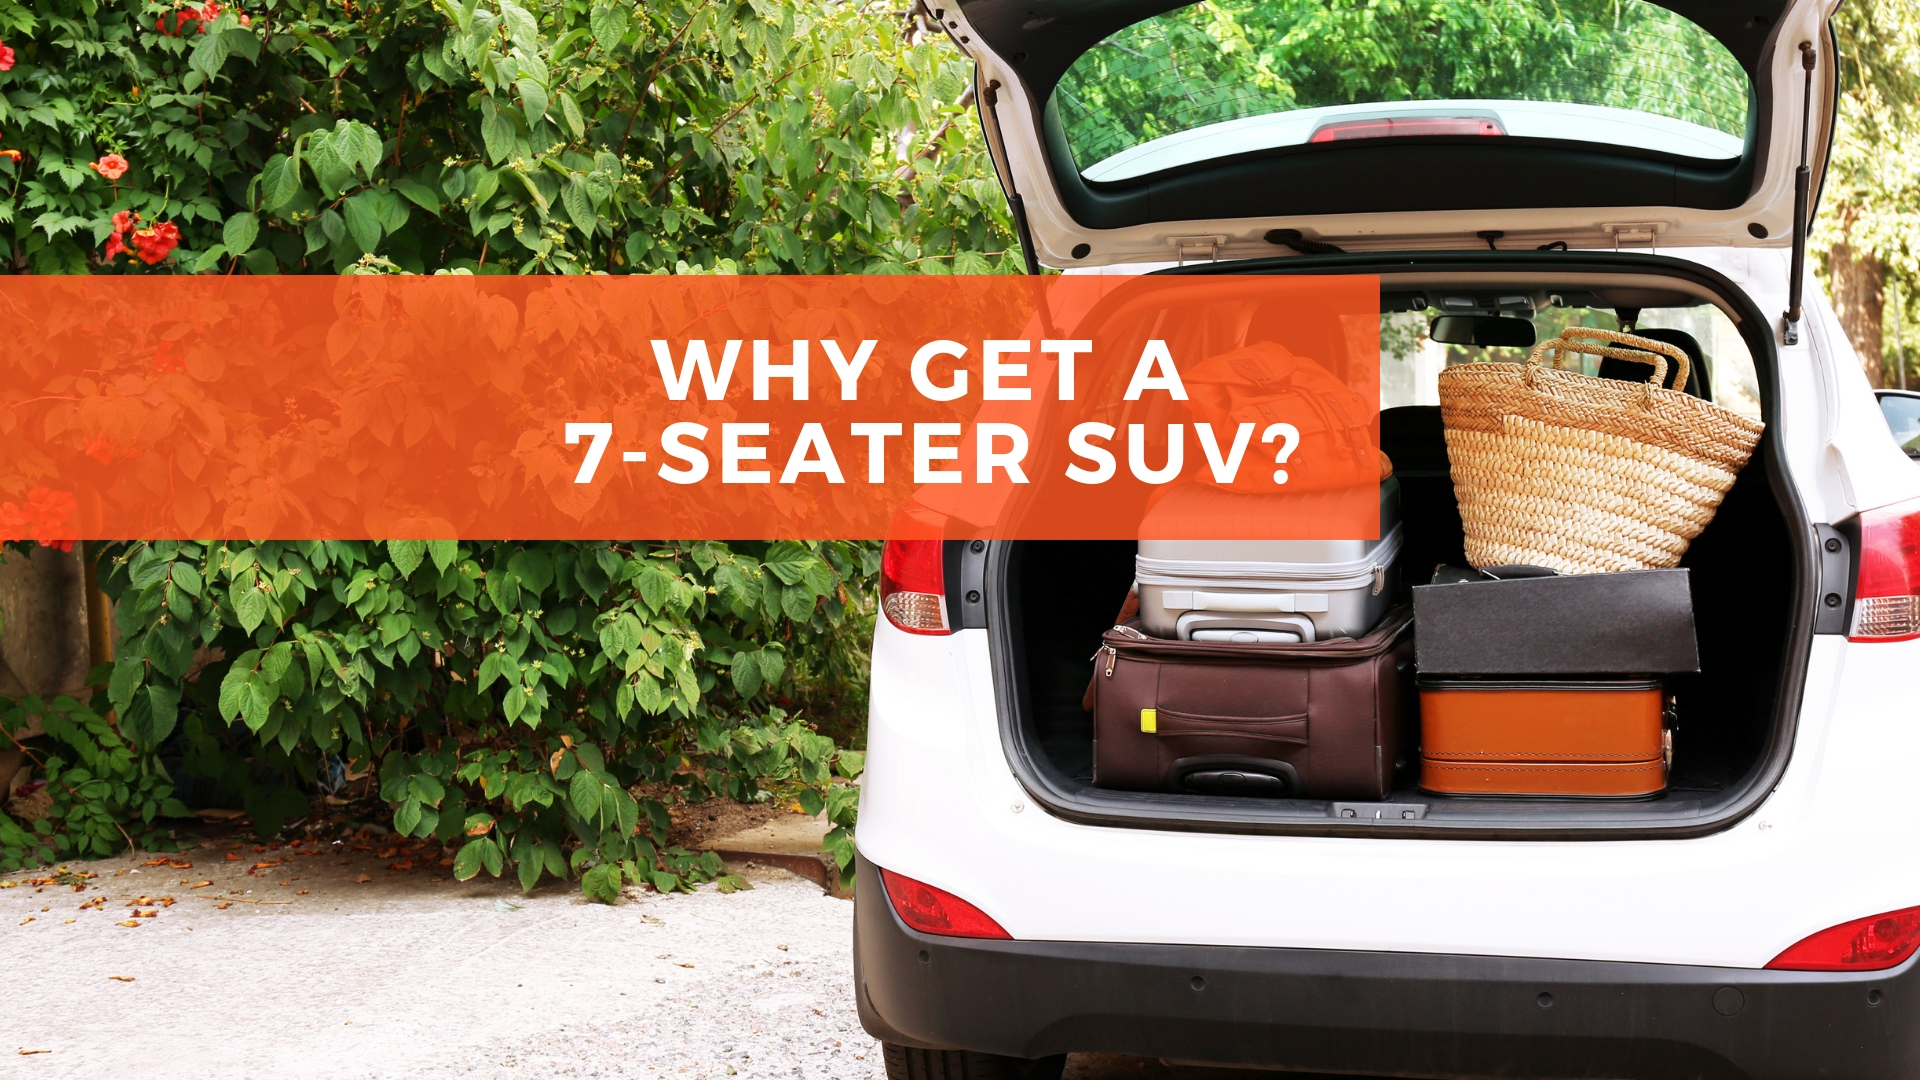 why get a 7-seater suv?